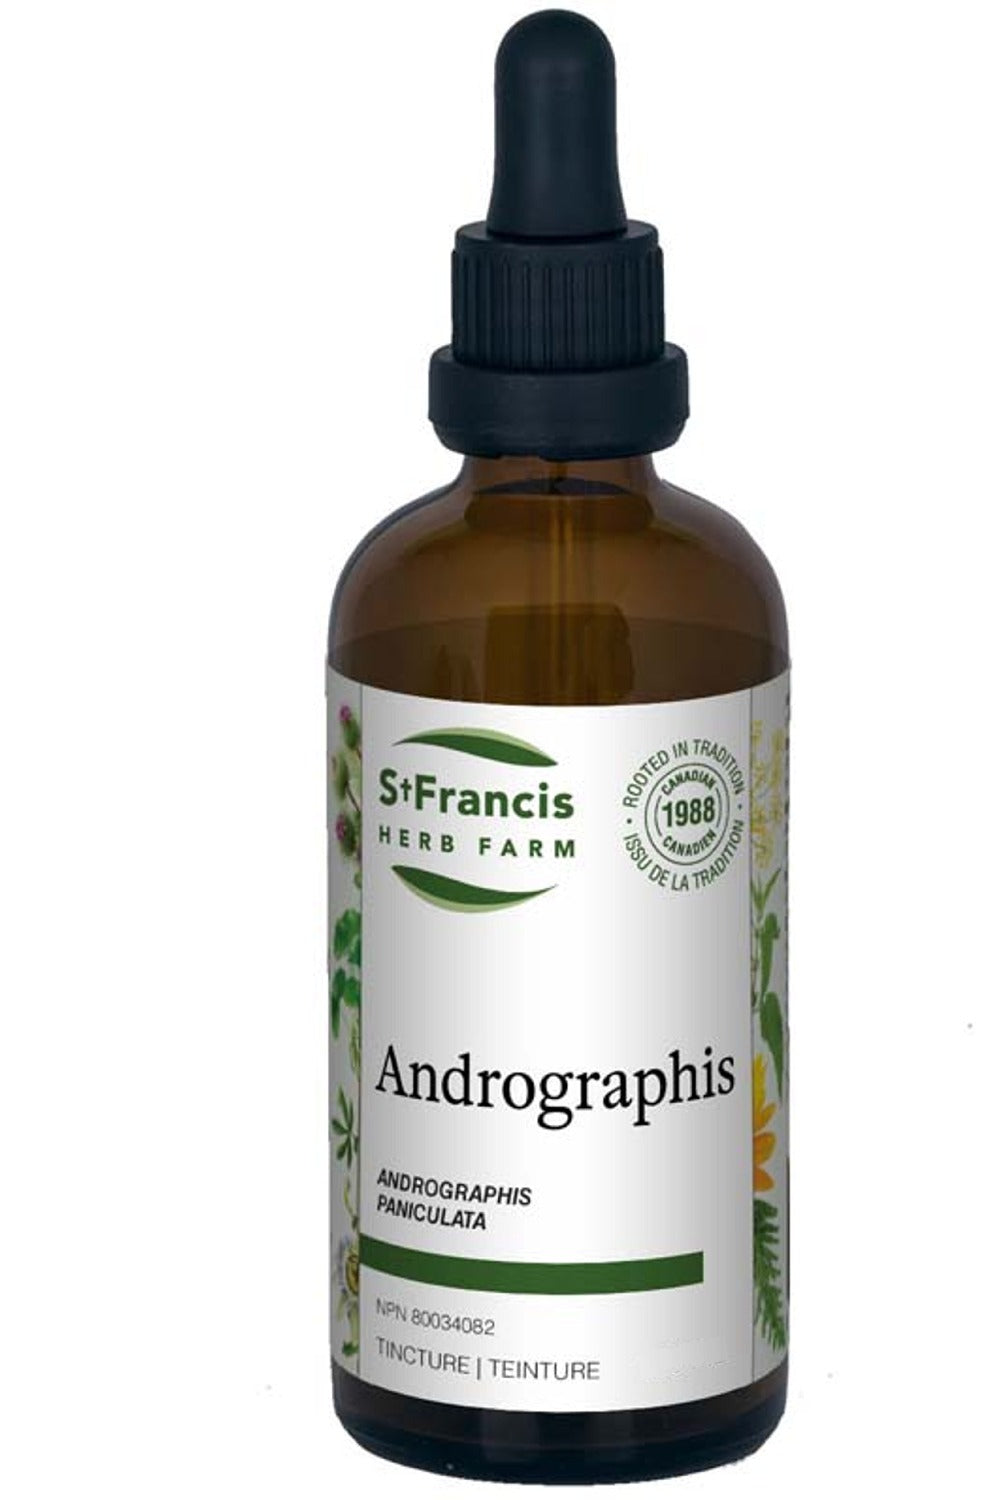 ST FRANCIS HERB FARM Andrographis (50 ml)